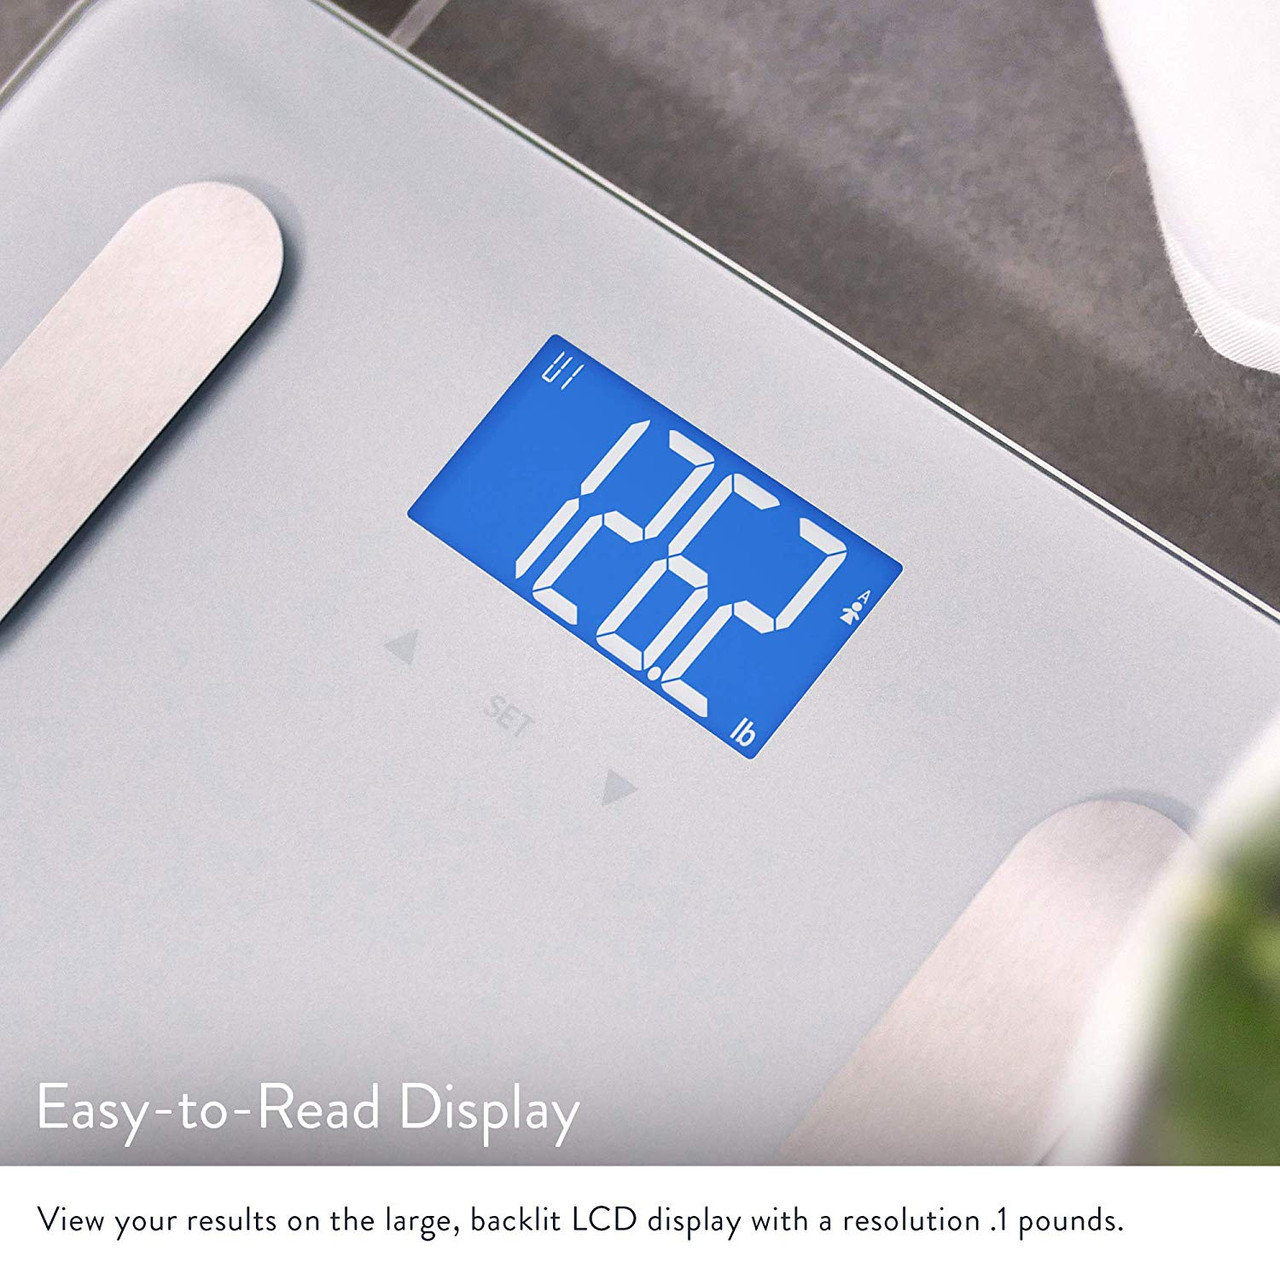 GreaterGoods Smart Scale, Bluetooth Connected Body Weight Bathroom Scale,  BMI, Body Fat, Muscle Mass, Water Weight, FSA HSA Approved (Black Stainless)